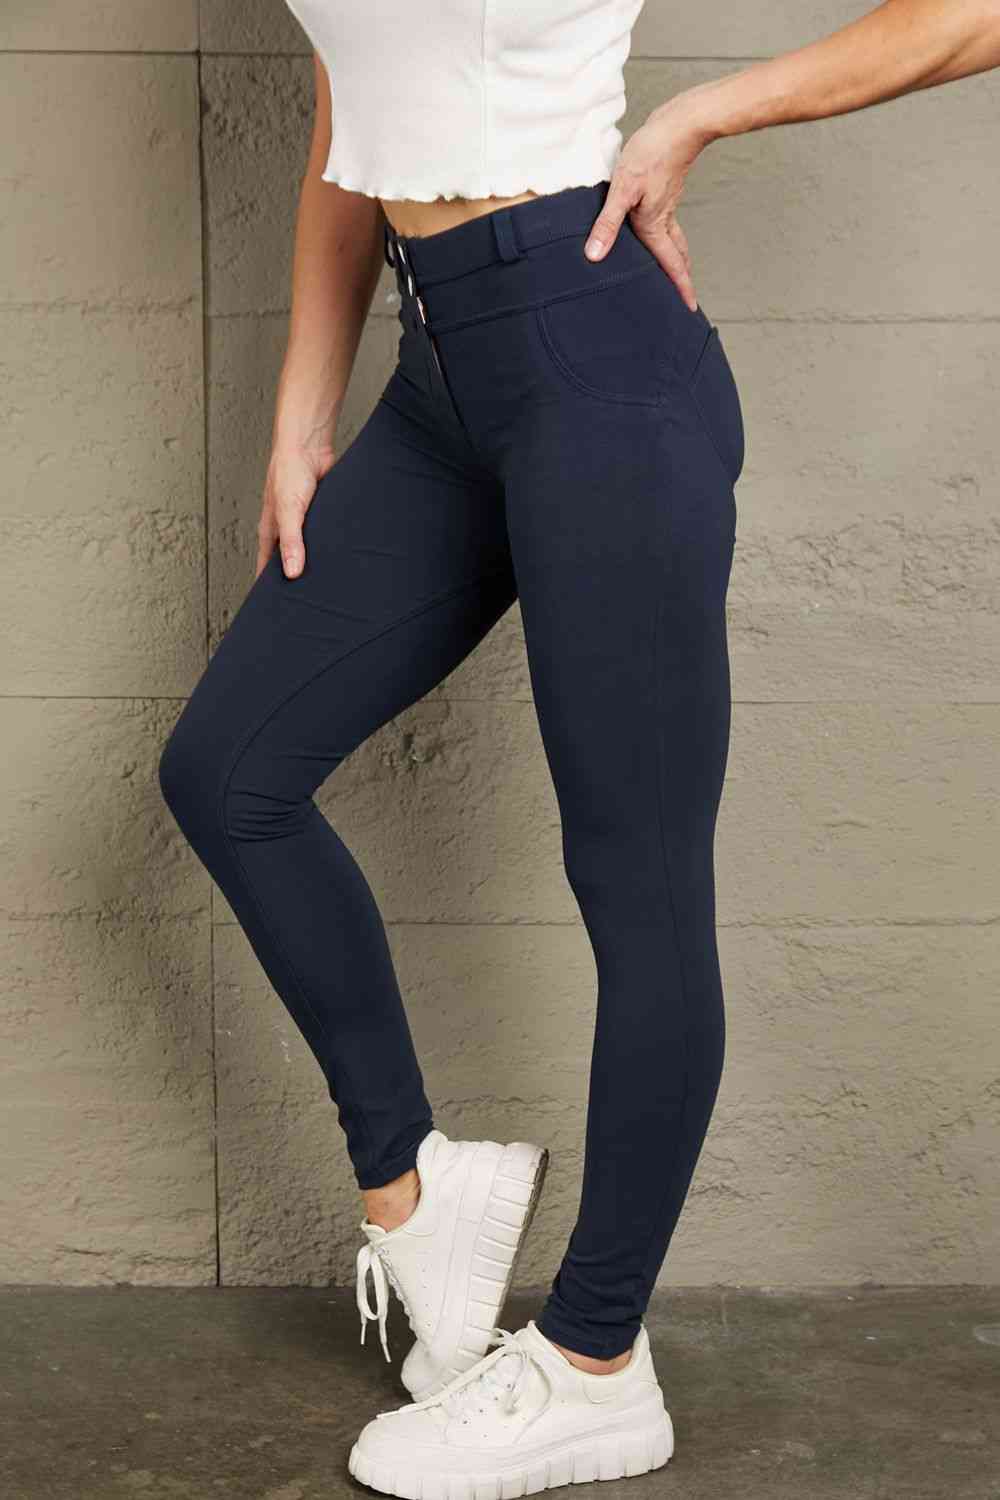 Dim Gray Baeful Buttoned Skinny Long Jeans Sentient Beauty Fashions Apparel & Accessories